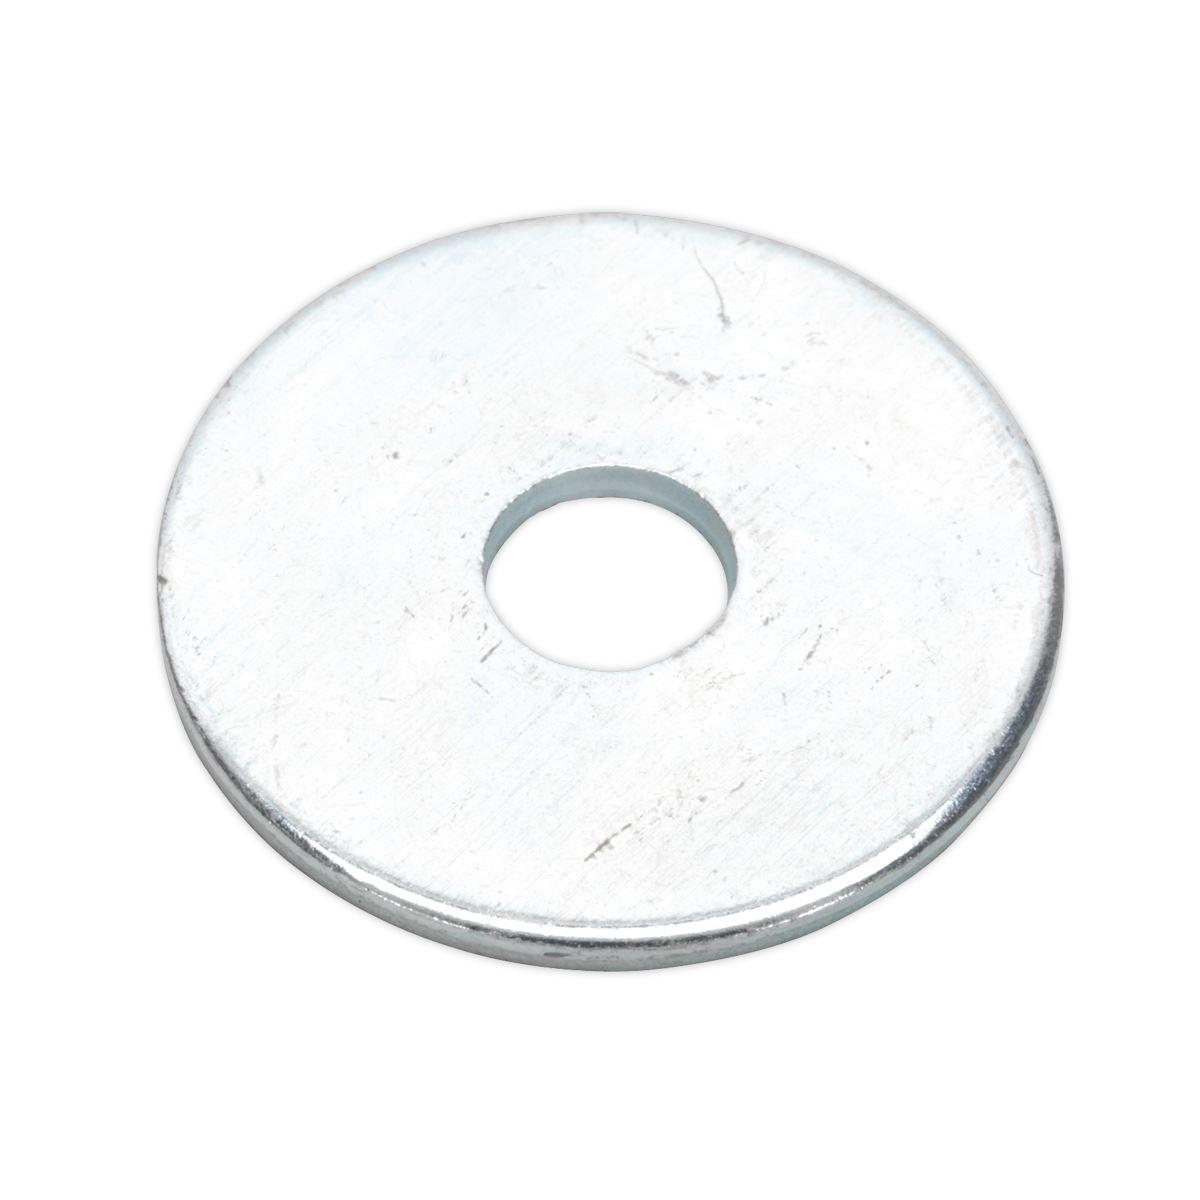 Sealey Repair Washer M6 x 25mm Zinc Plated Pack of 100